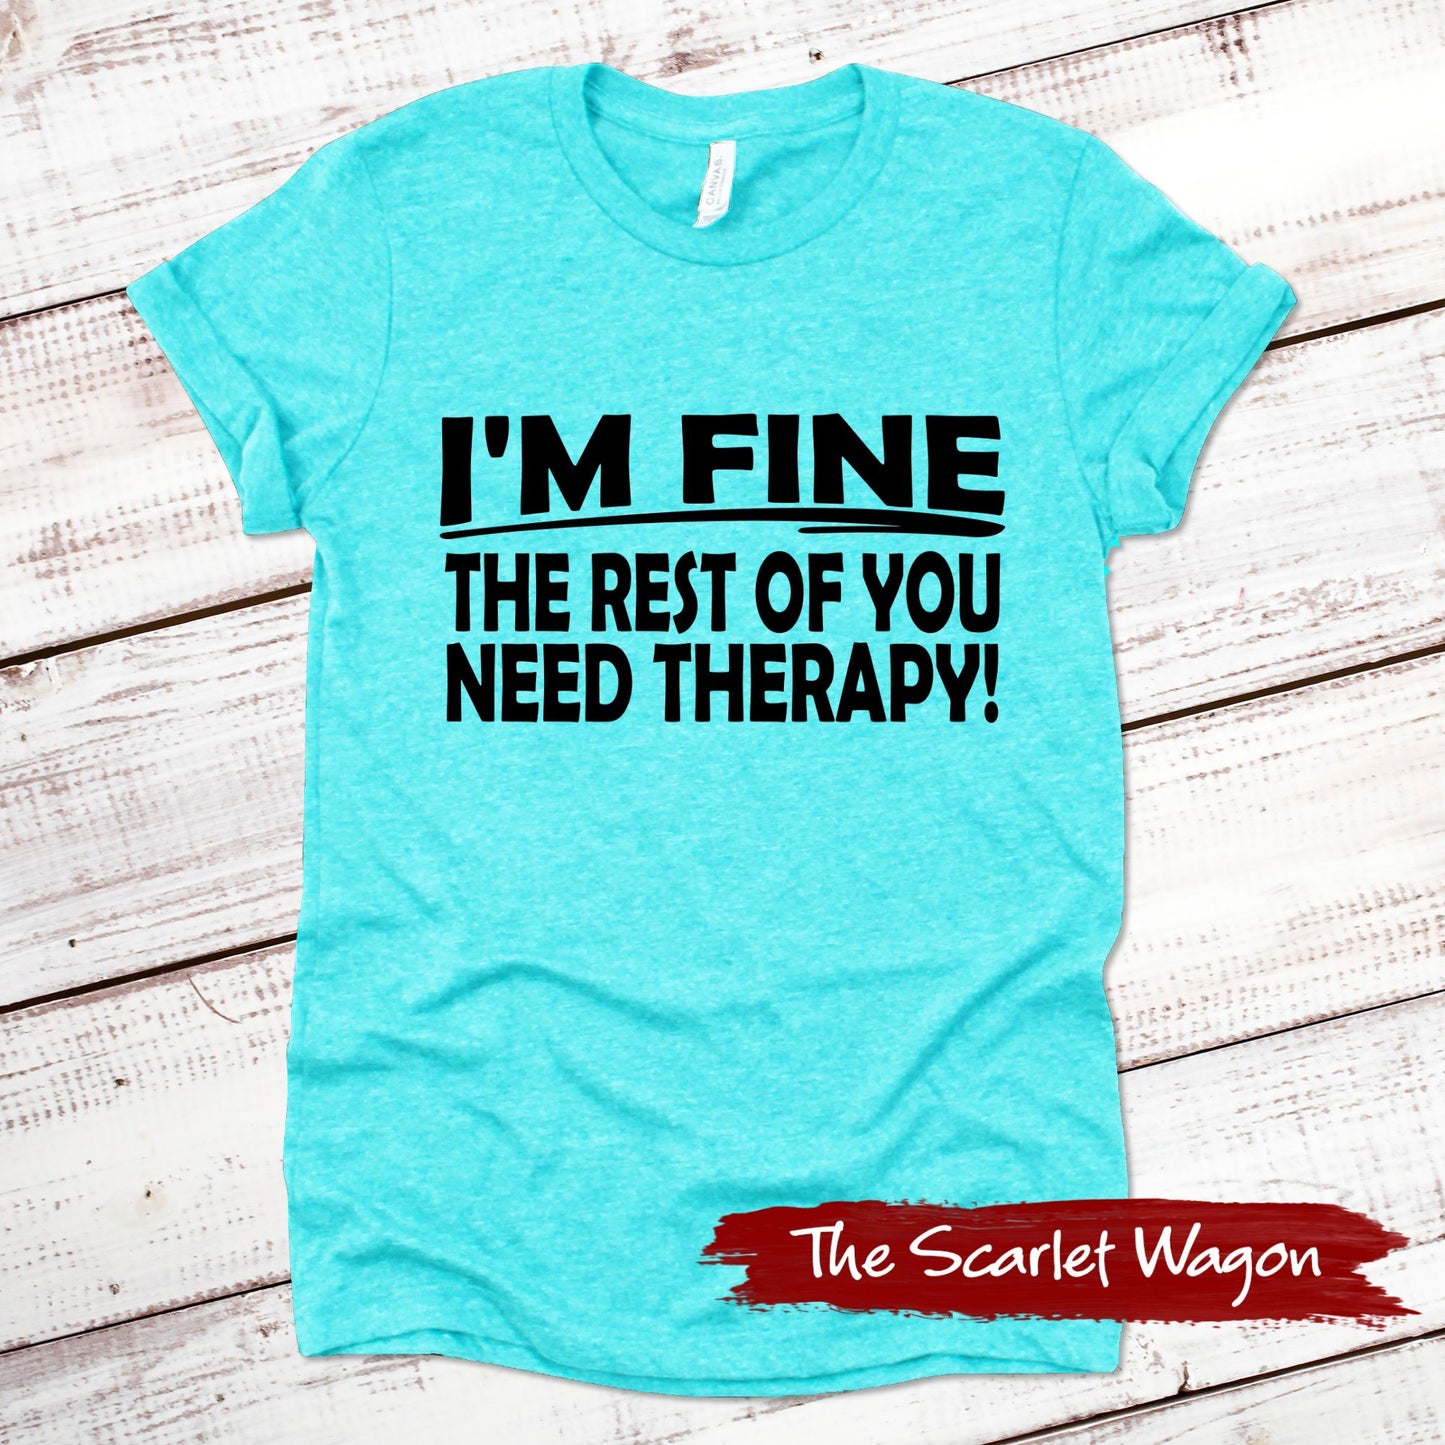 I'm Fine the Rest of You Need Therapy Funny Shirt Scarlet Wagon Heather Teal XS 